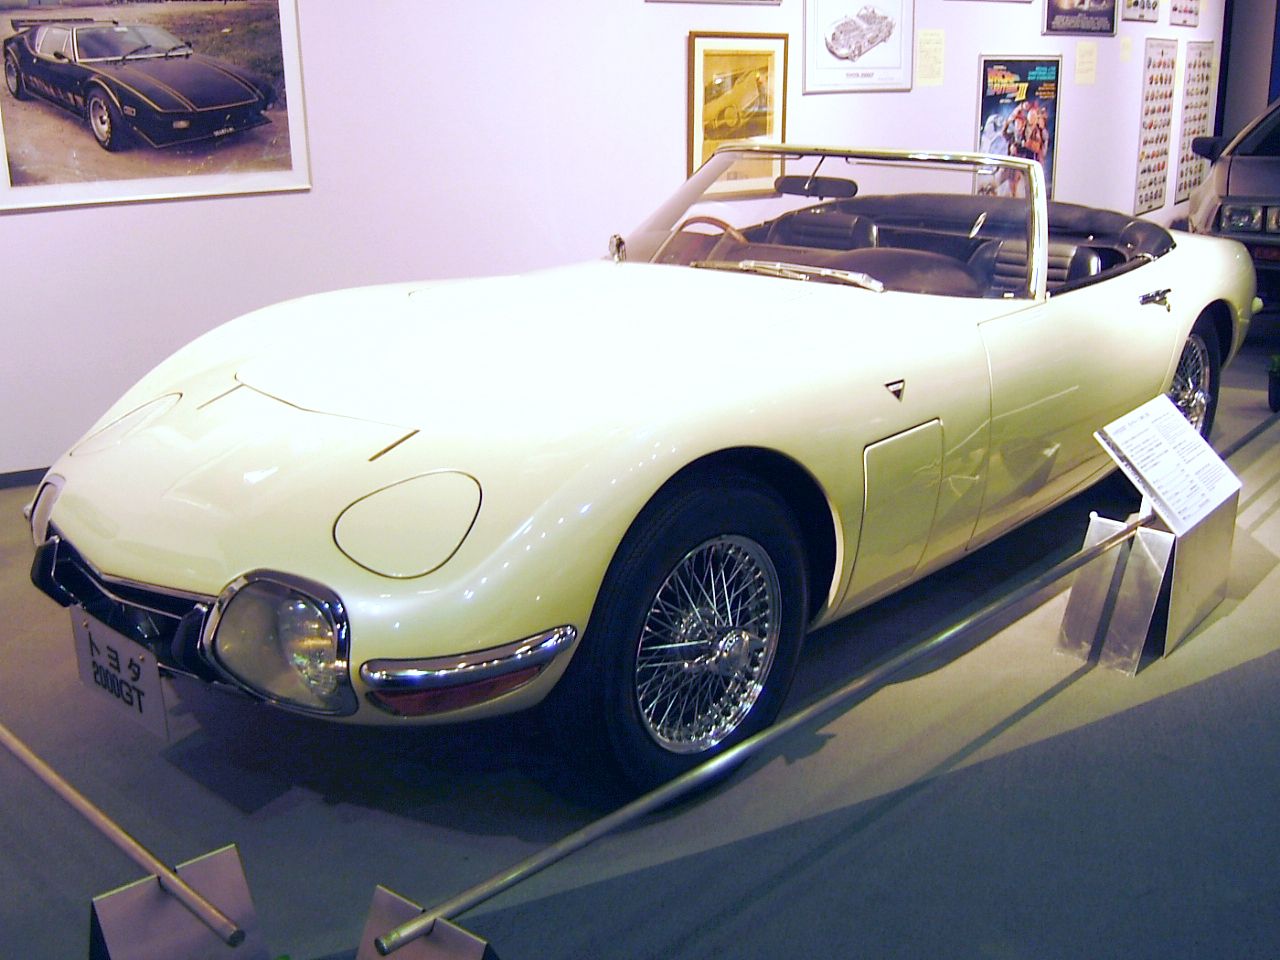 Toyota 2000 GT at display